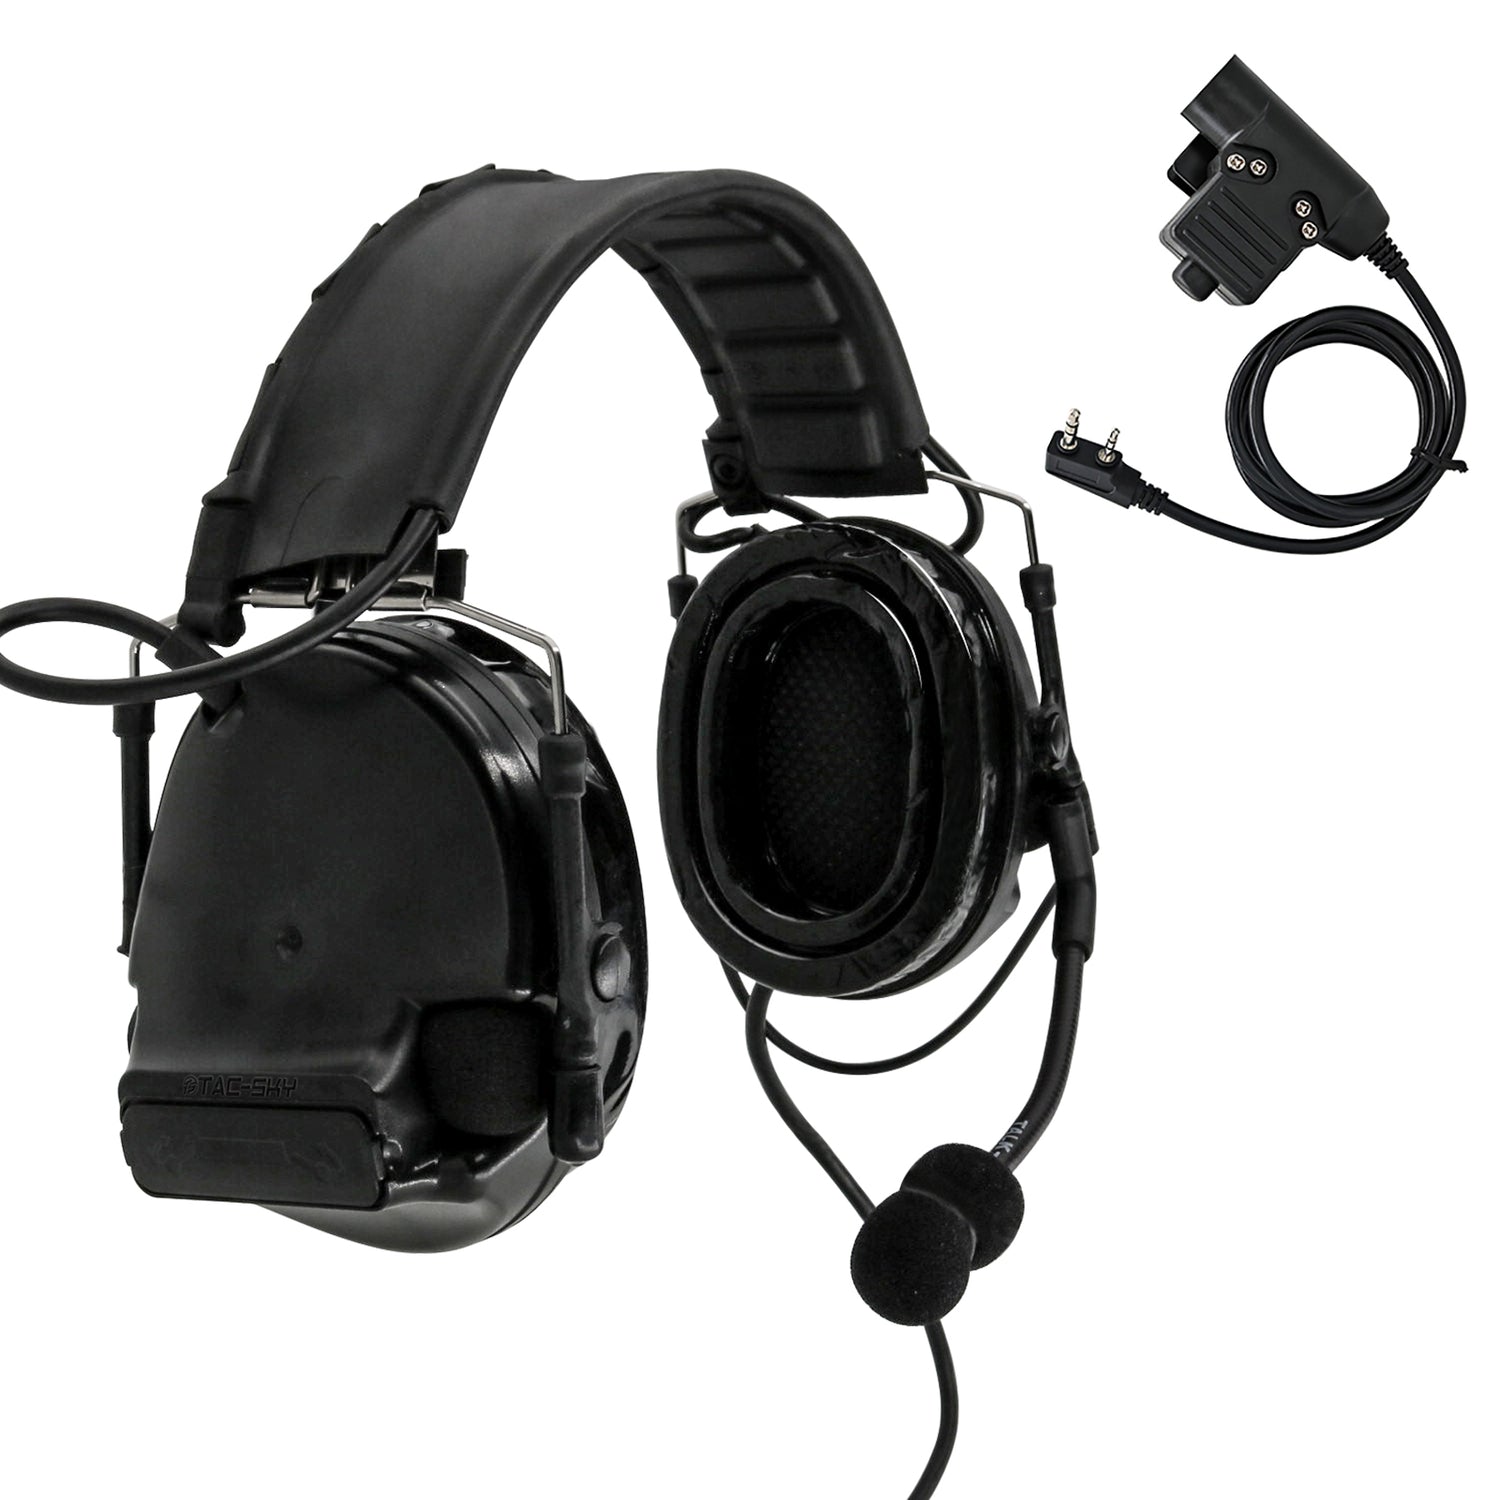 TAC-SKY C3 Tactical Headset Noise-canceling airsoft protective